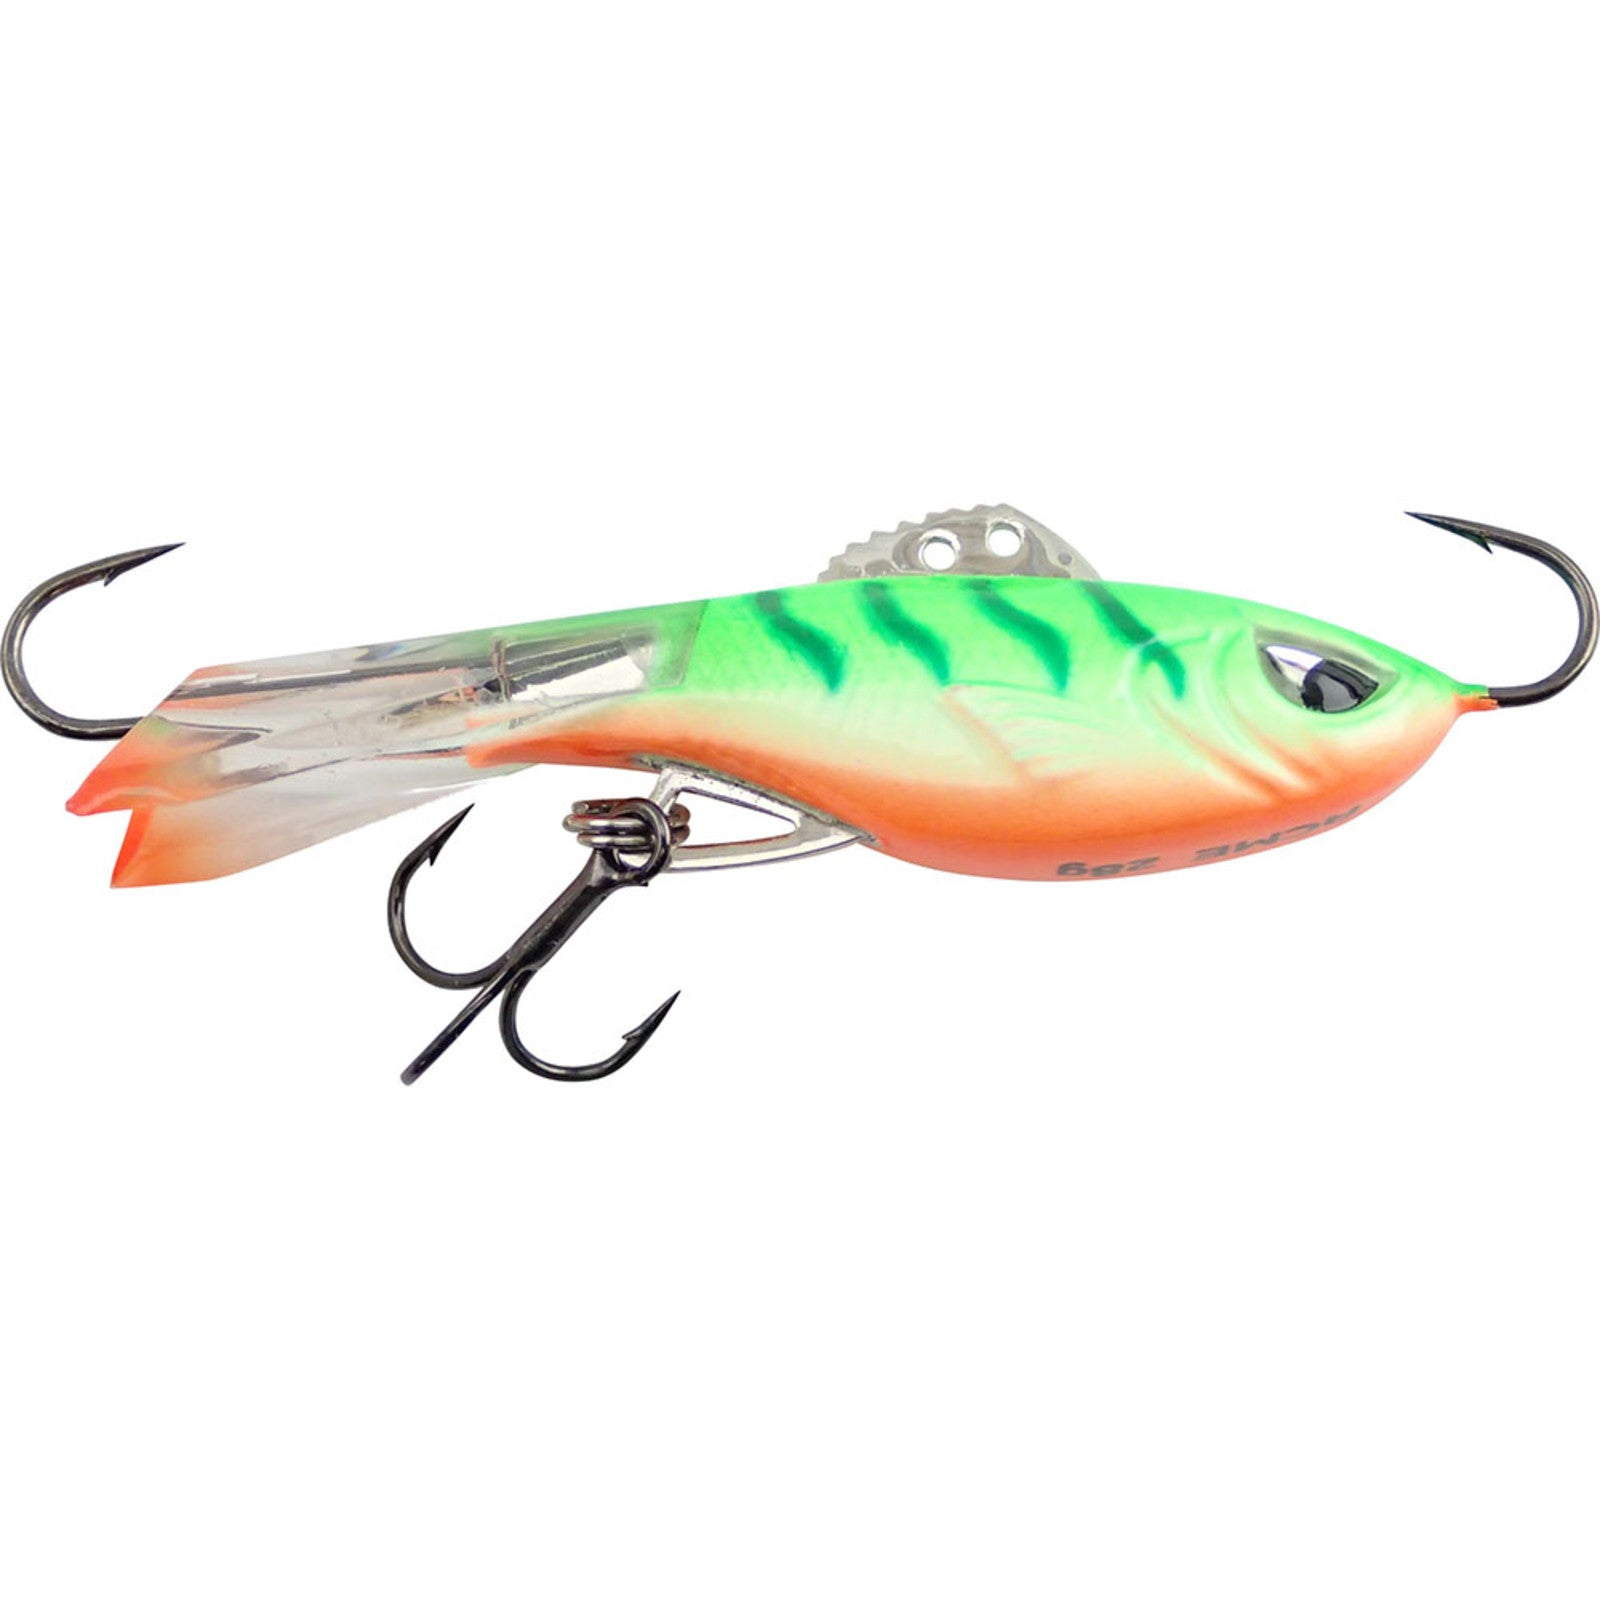 Acme Hyper Series Lures - Acme Tackle Company